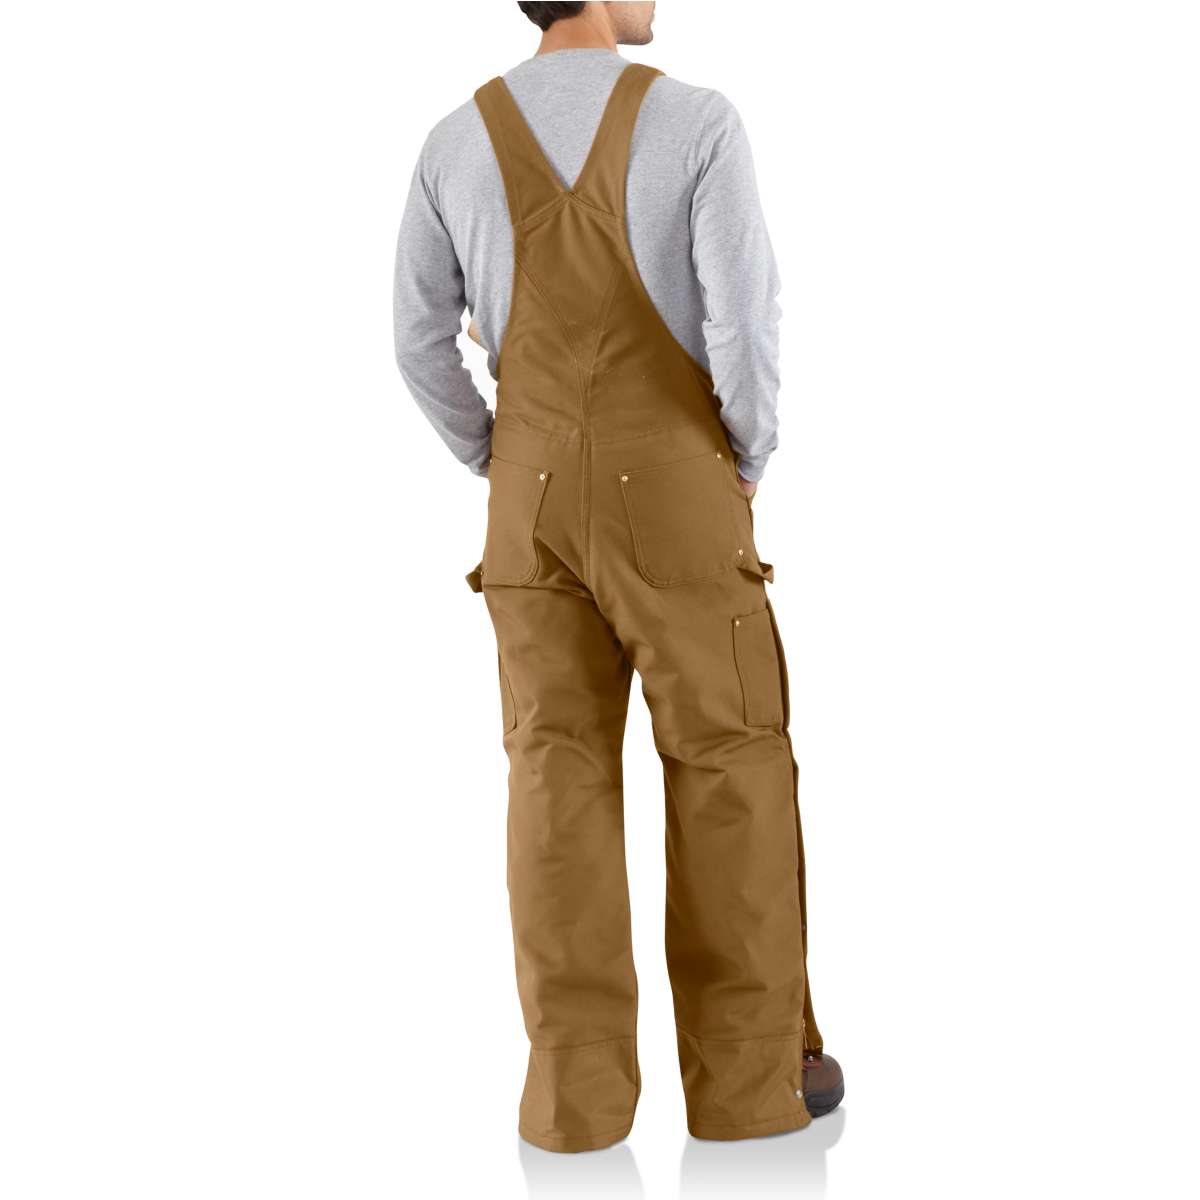 R41 - Loose Fit Firm Duck Insulated Bib Overall